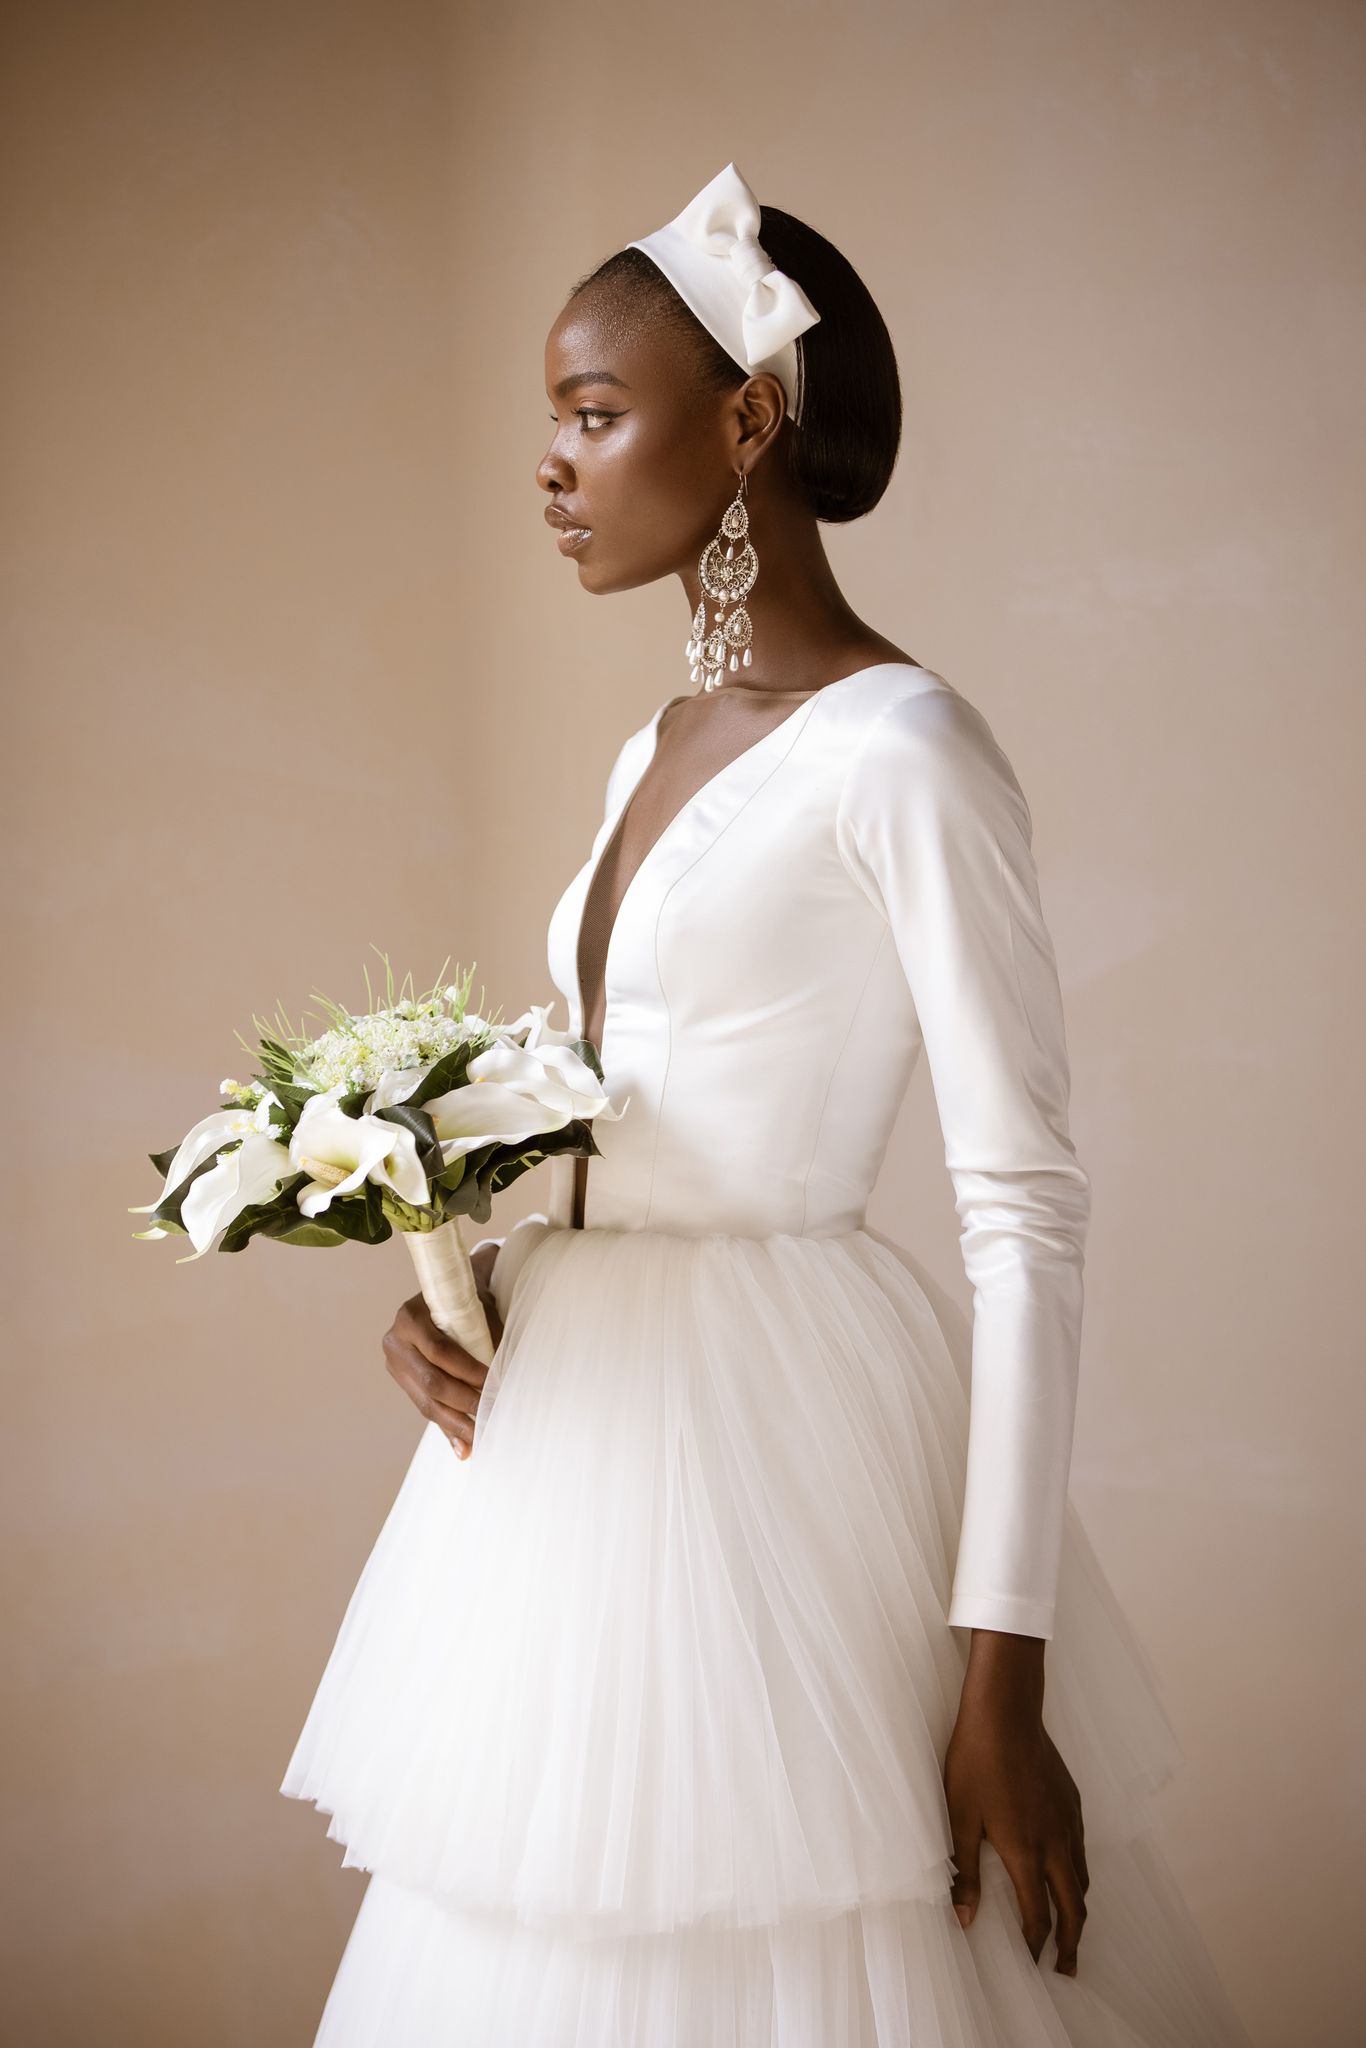 bespoke bridal suit and wedding gown